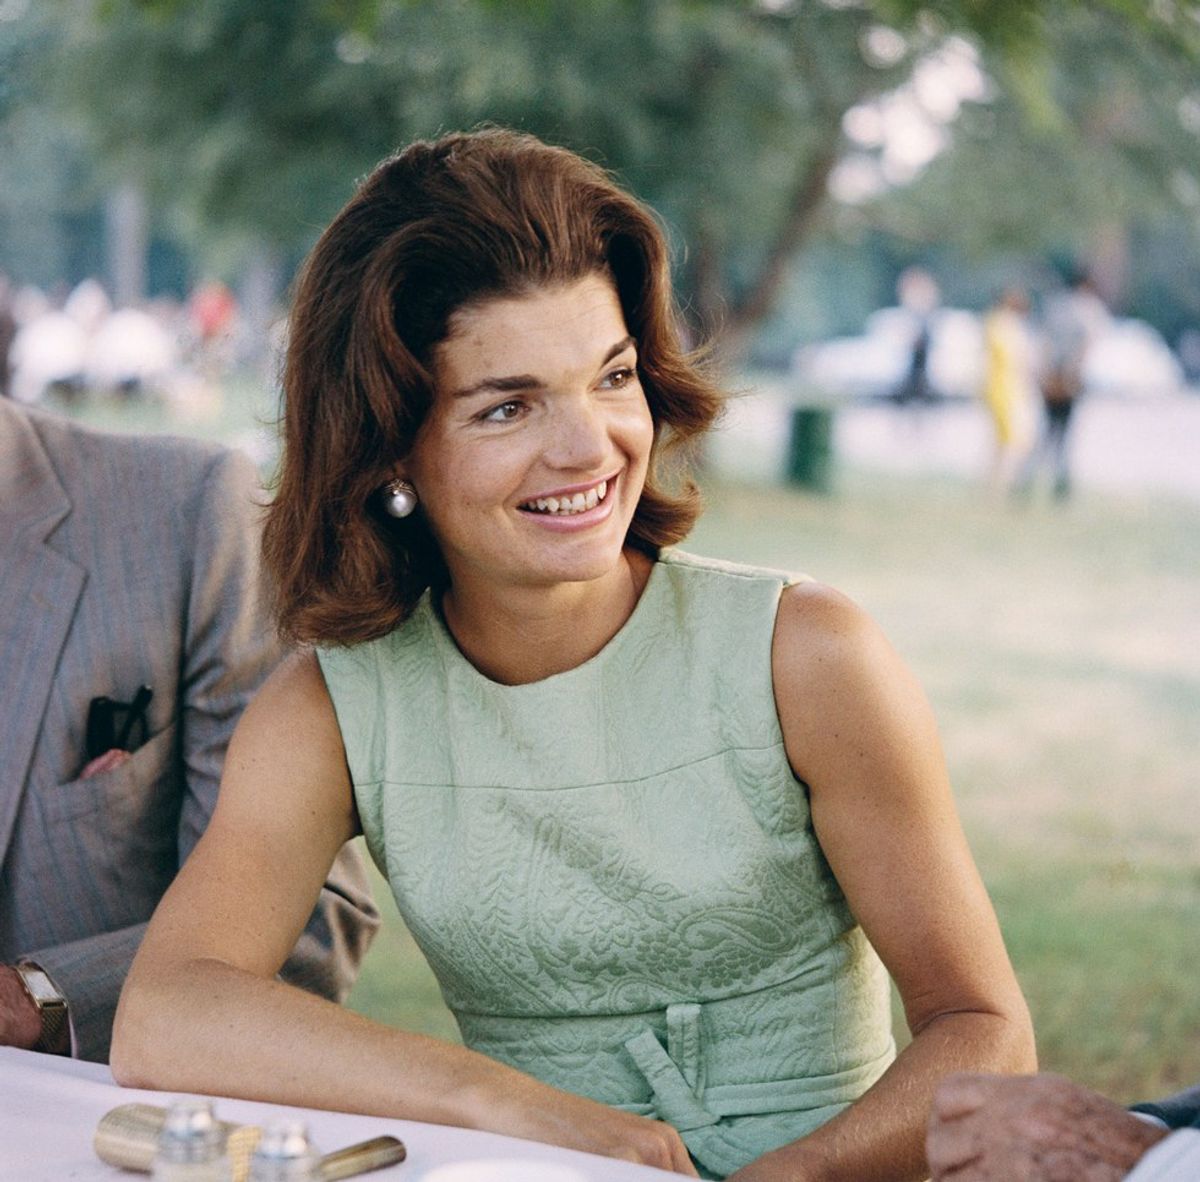 7 Quotes From A Beautiful First Lady: Jackie Kennedy Onassis